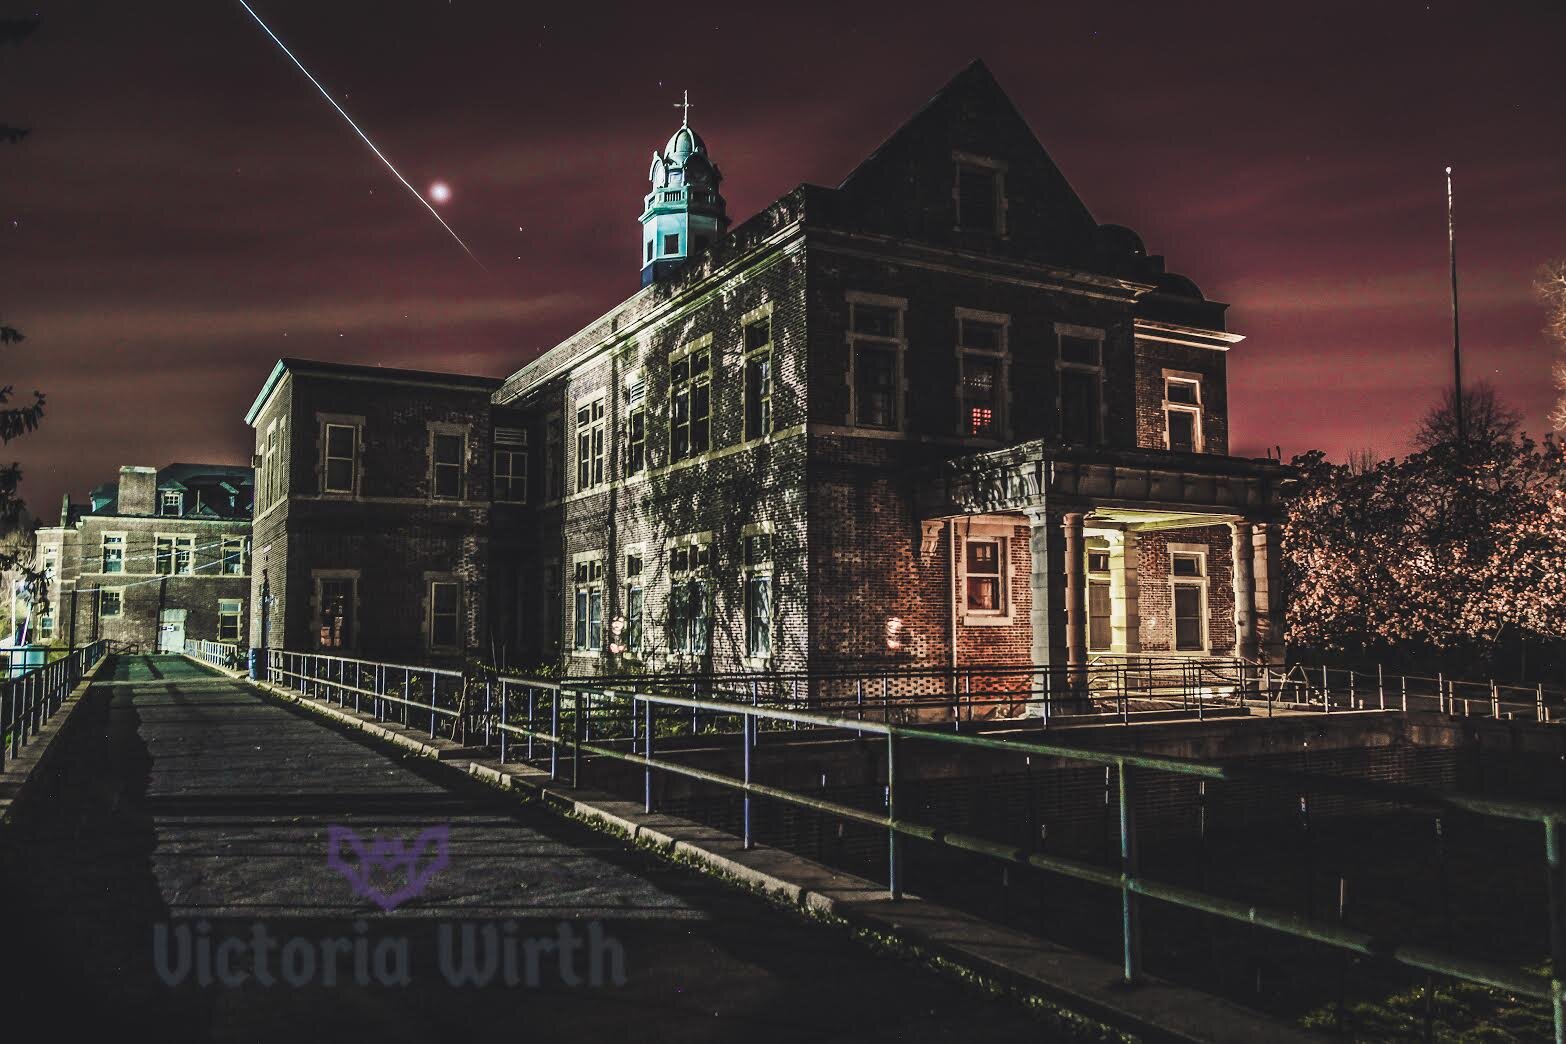  Victoria Wirth  Falling Stars  -Photo taken at the Pennhurst State School and Hospital located in Spring City, Pennsylvania.  Prices Vary - Check Website  https://vwirthphoto.visualsociety.com/galleries/abandoned/falling-stars  Contact: VWirthPhoto@